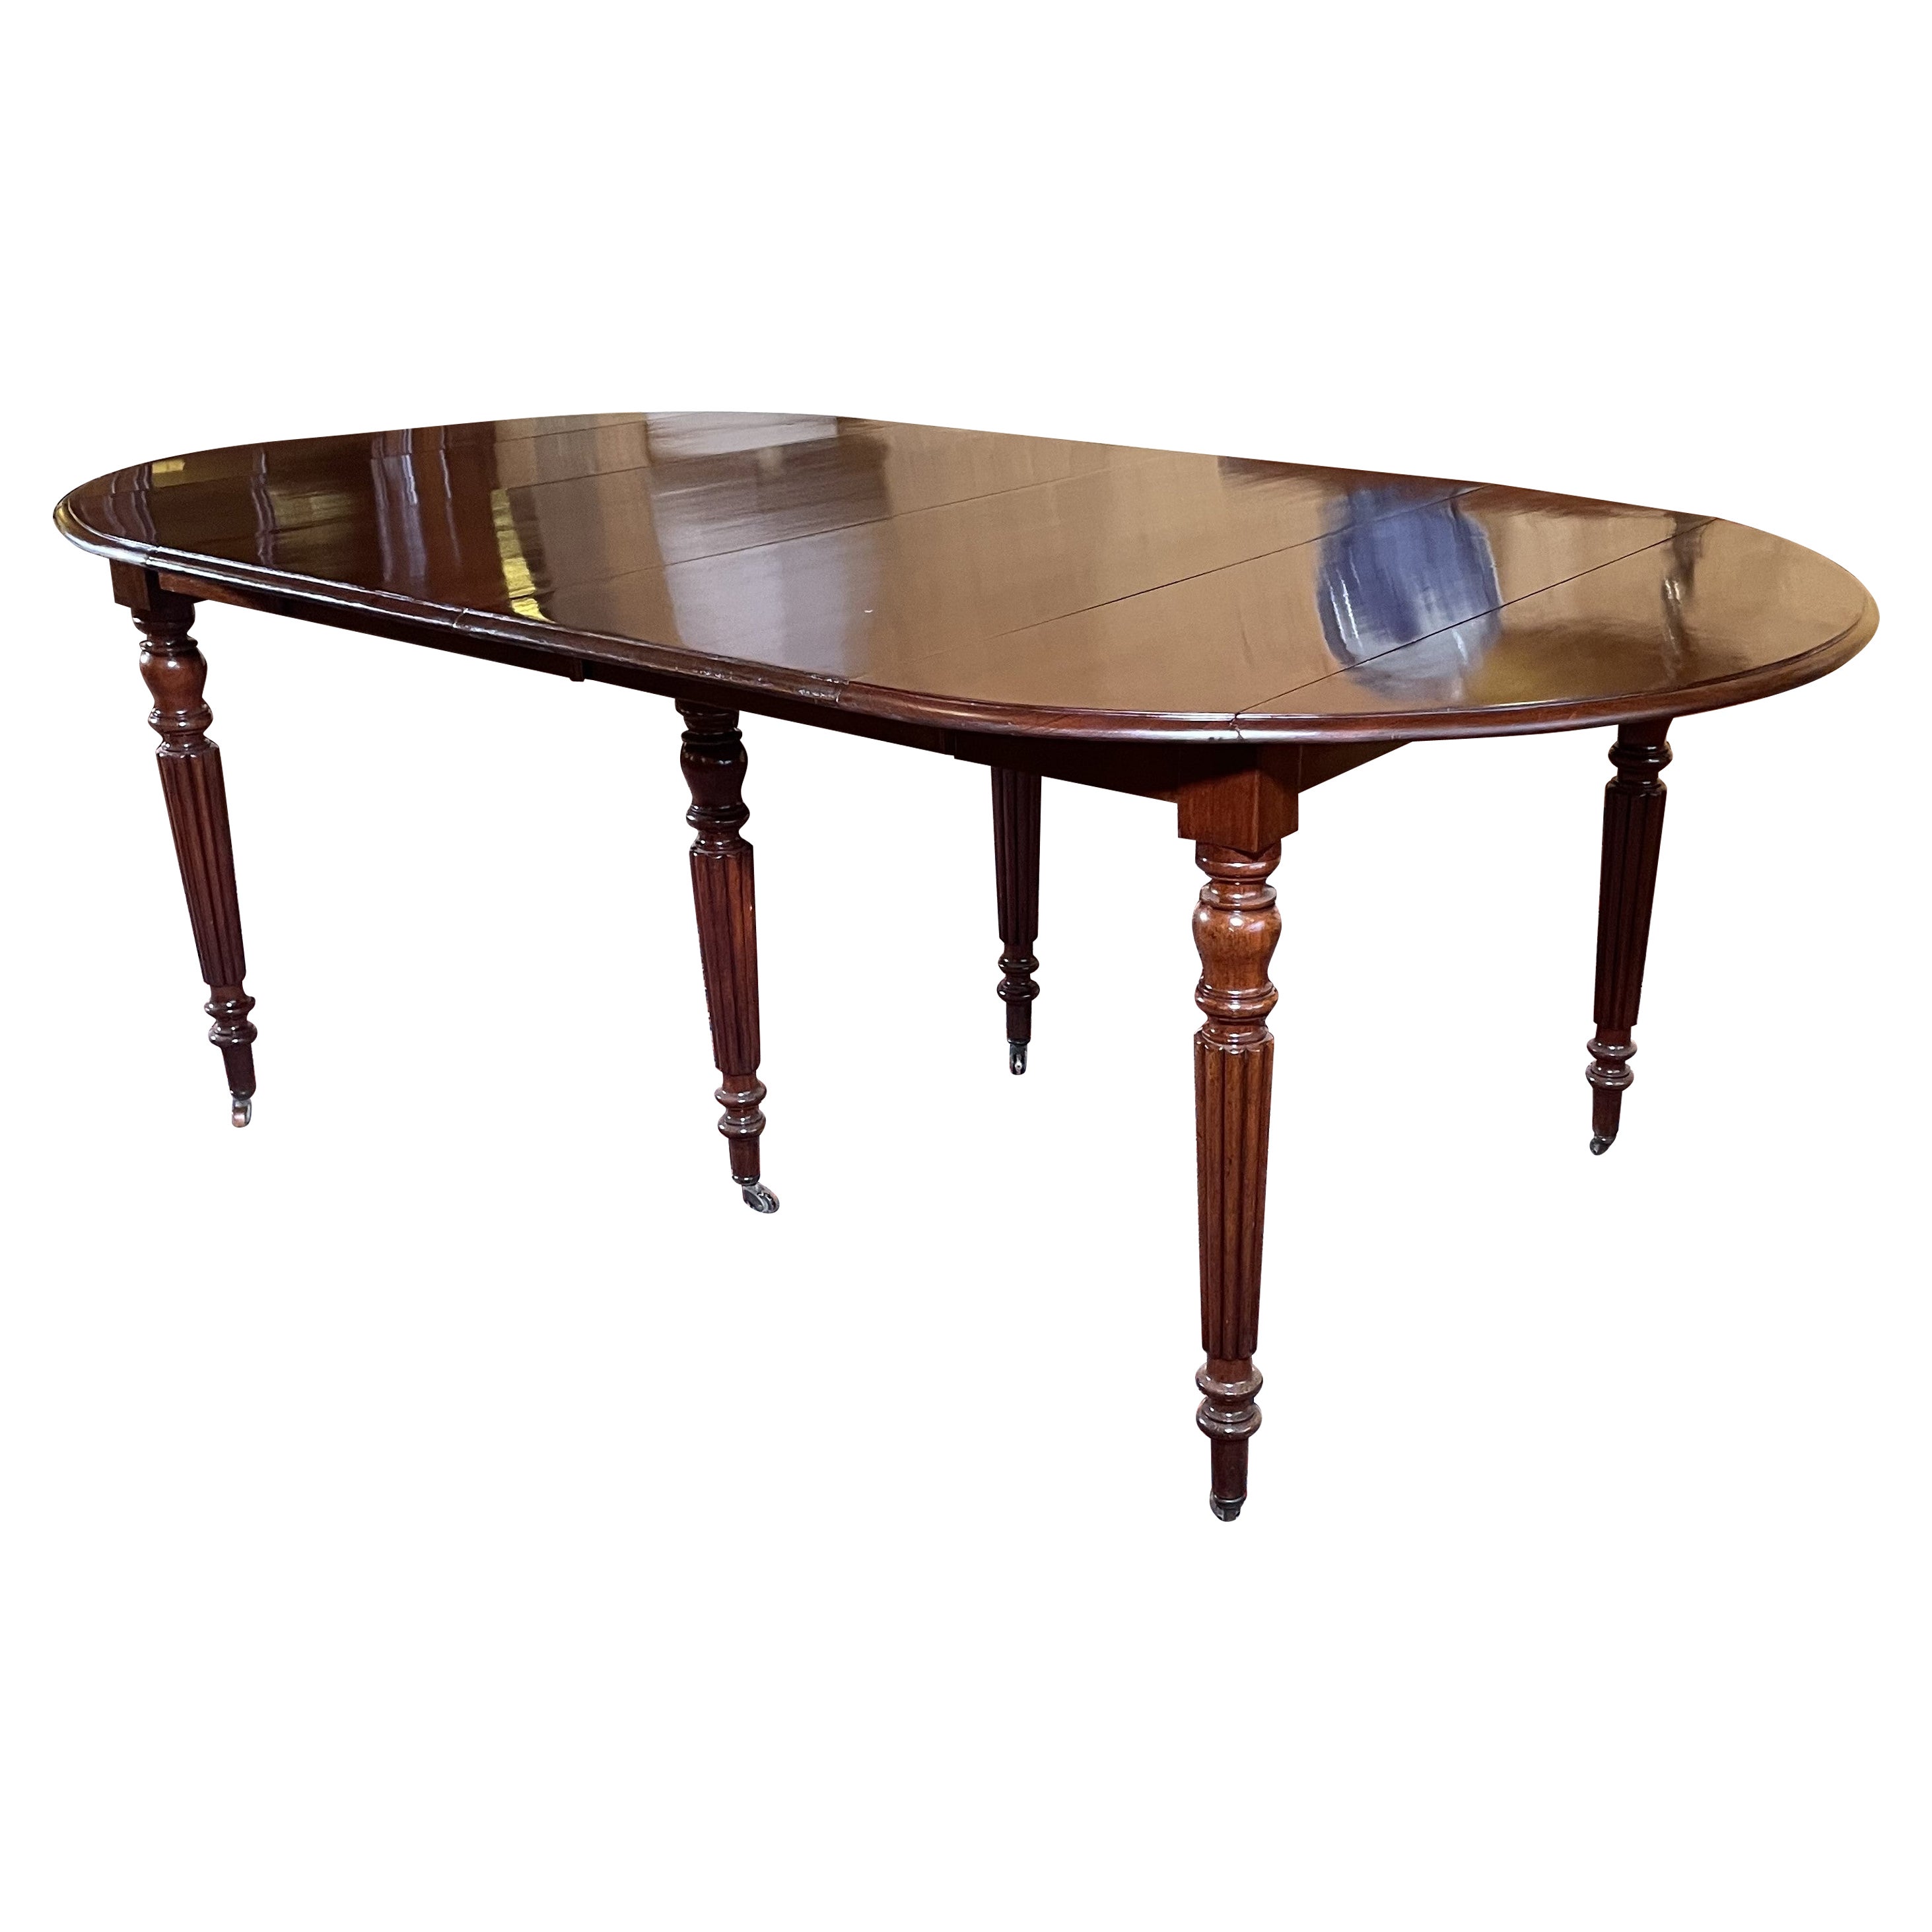 Mahogany Extending Table From The 19th Century For Sale